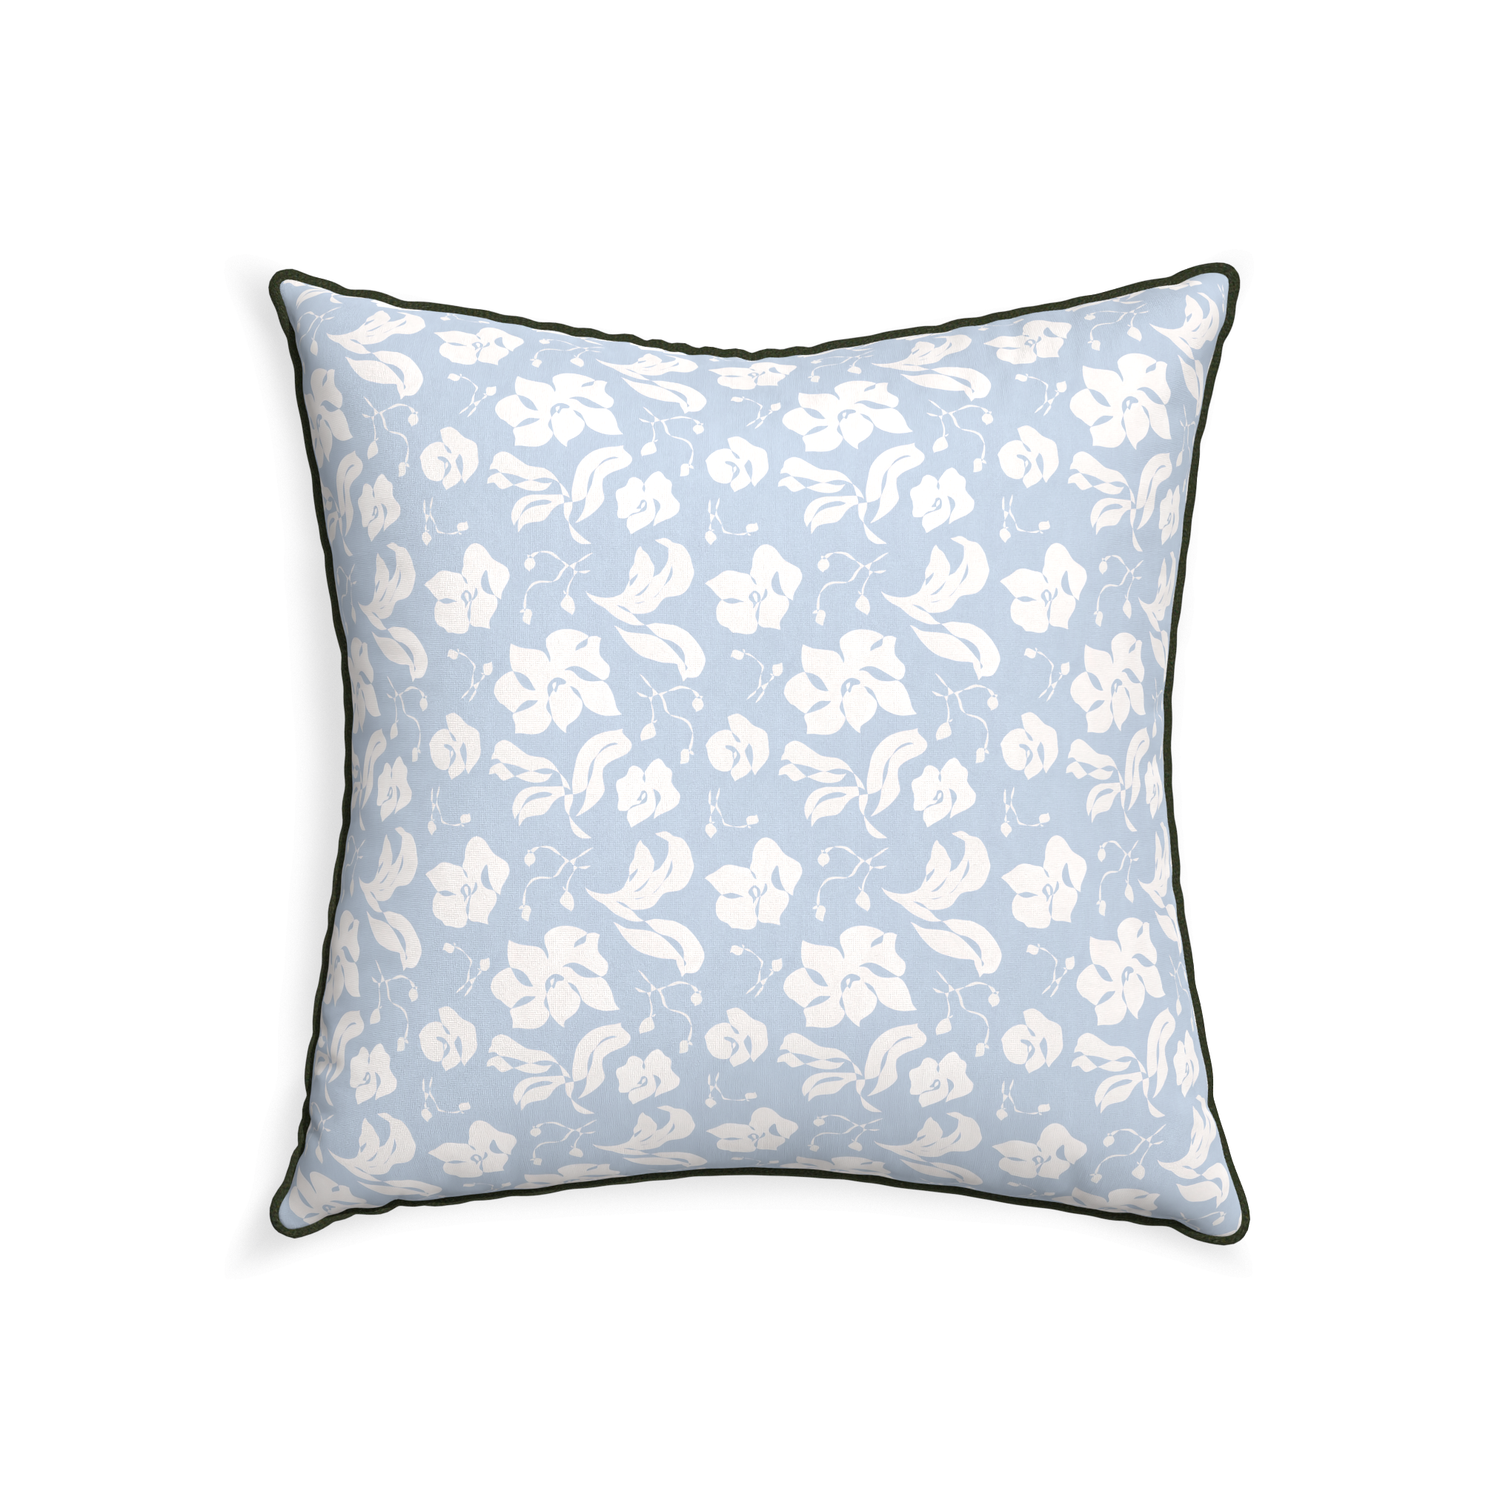 22-square georgia custom cornflower blue floralpillow with f piping on white background